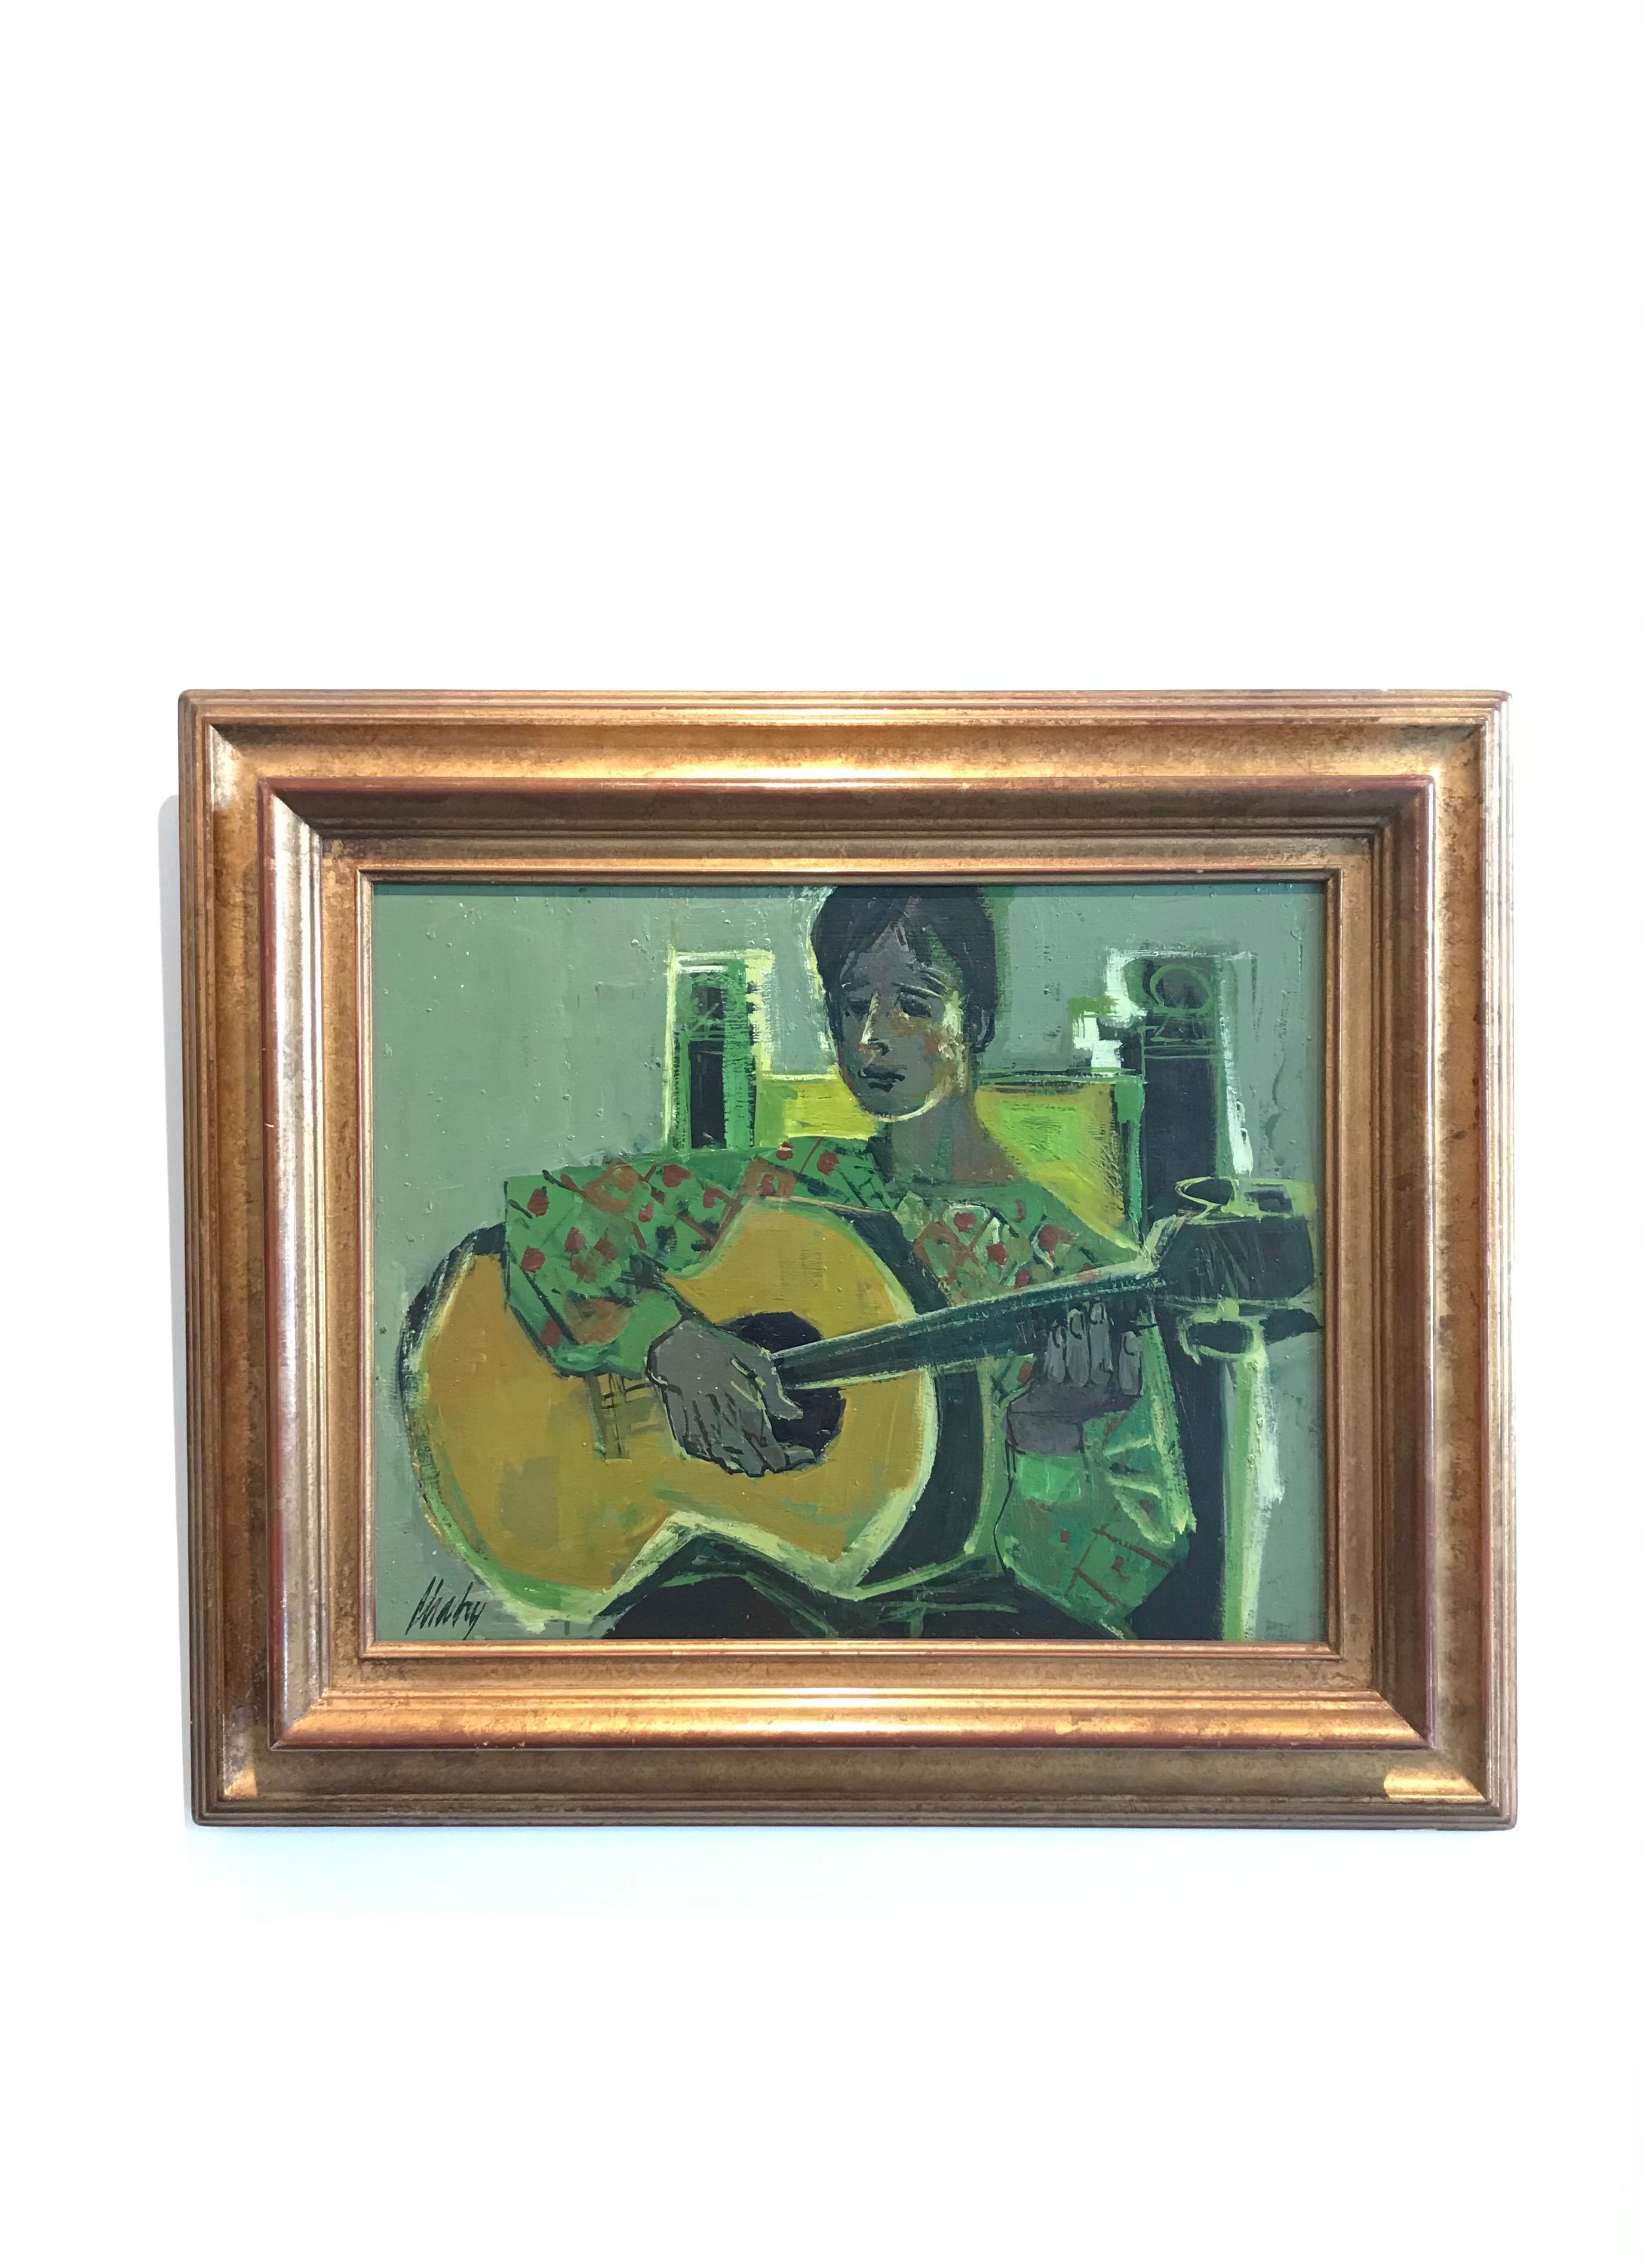 Young woman with guitar - Painting by Frank Chabry